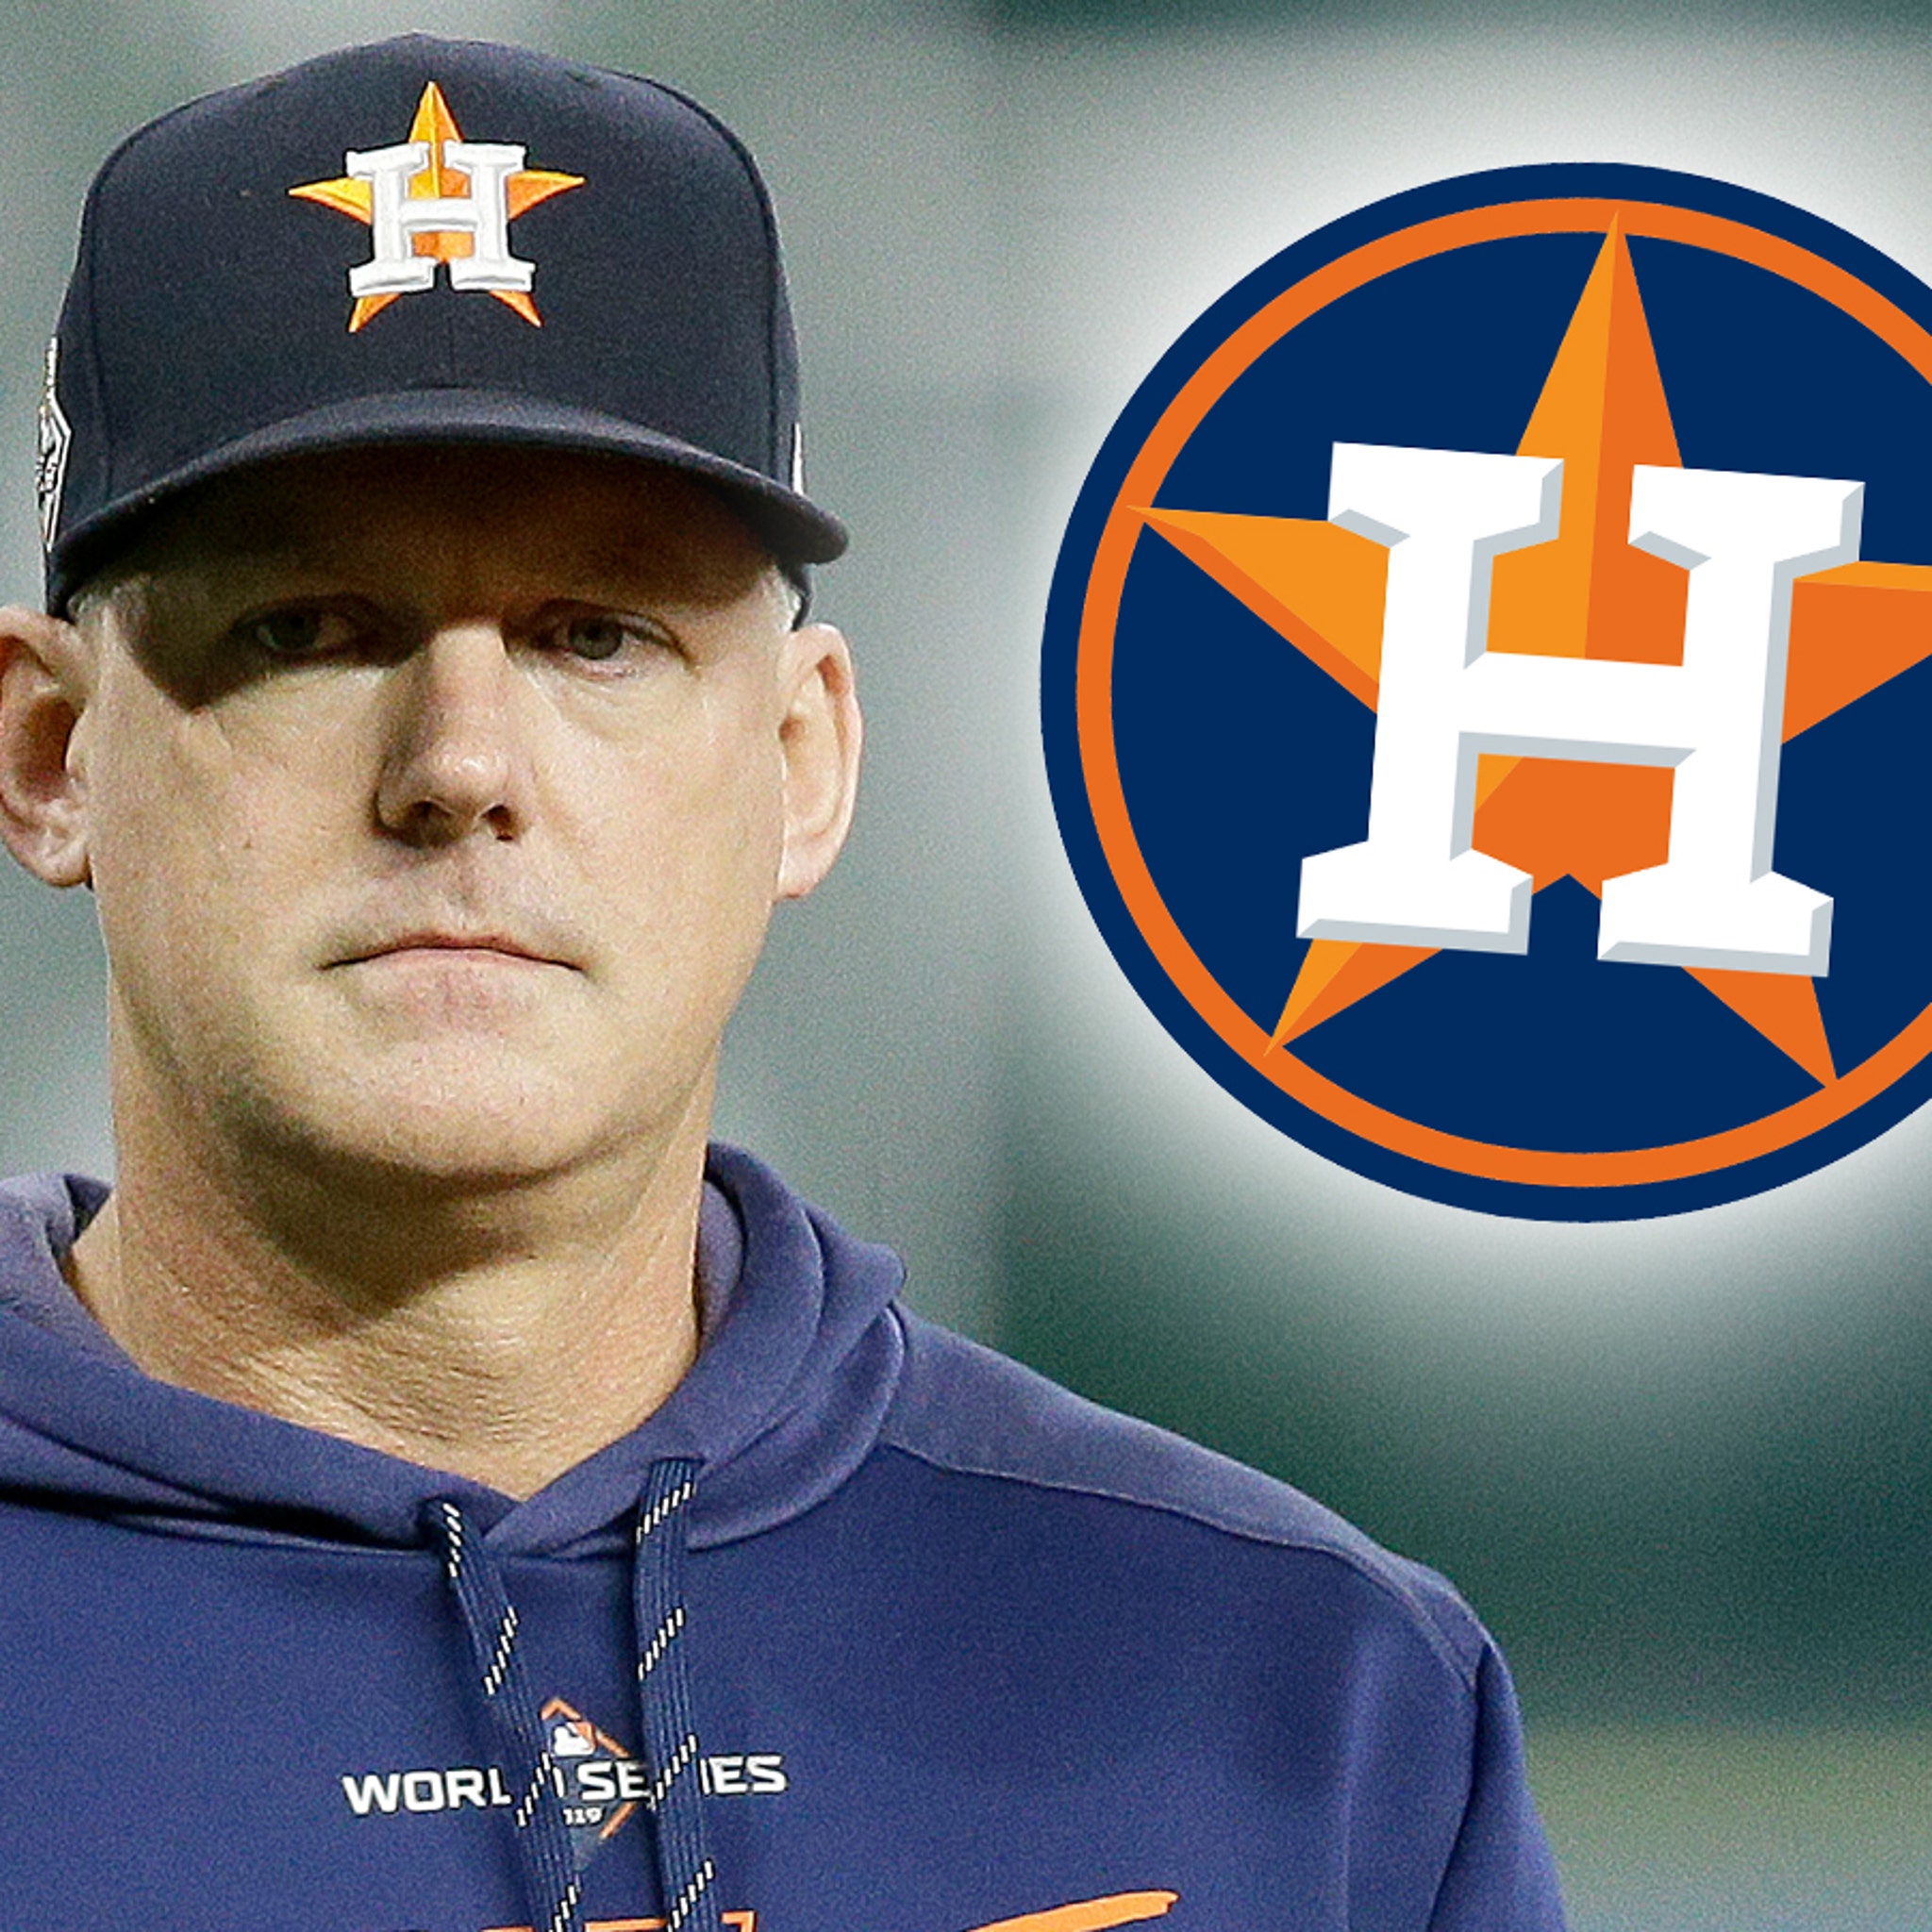 Houston Astros manager, general manager fired for sign stealing